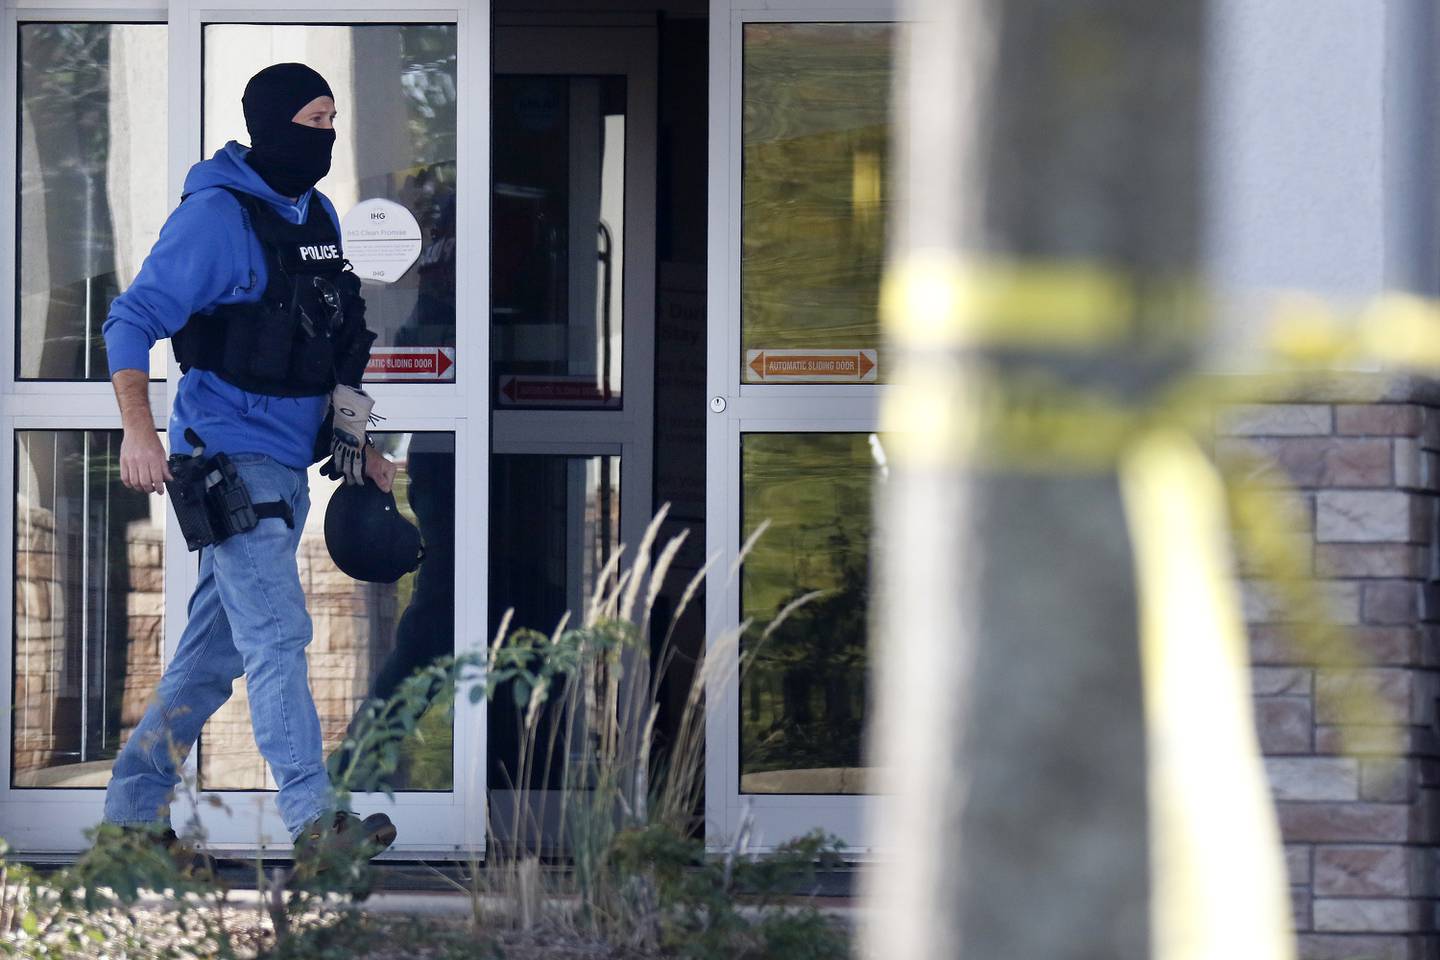 Police, sheriff's deputies, and law enforcement in SWAT gear were on hand to handle a situation Wednesday, Oct. 27, 2021, at the Holiday Inn Express across from Jacobs High School in Algonquin.